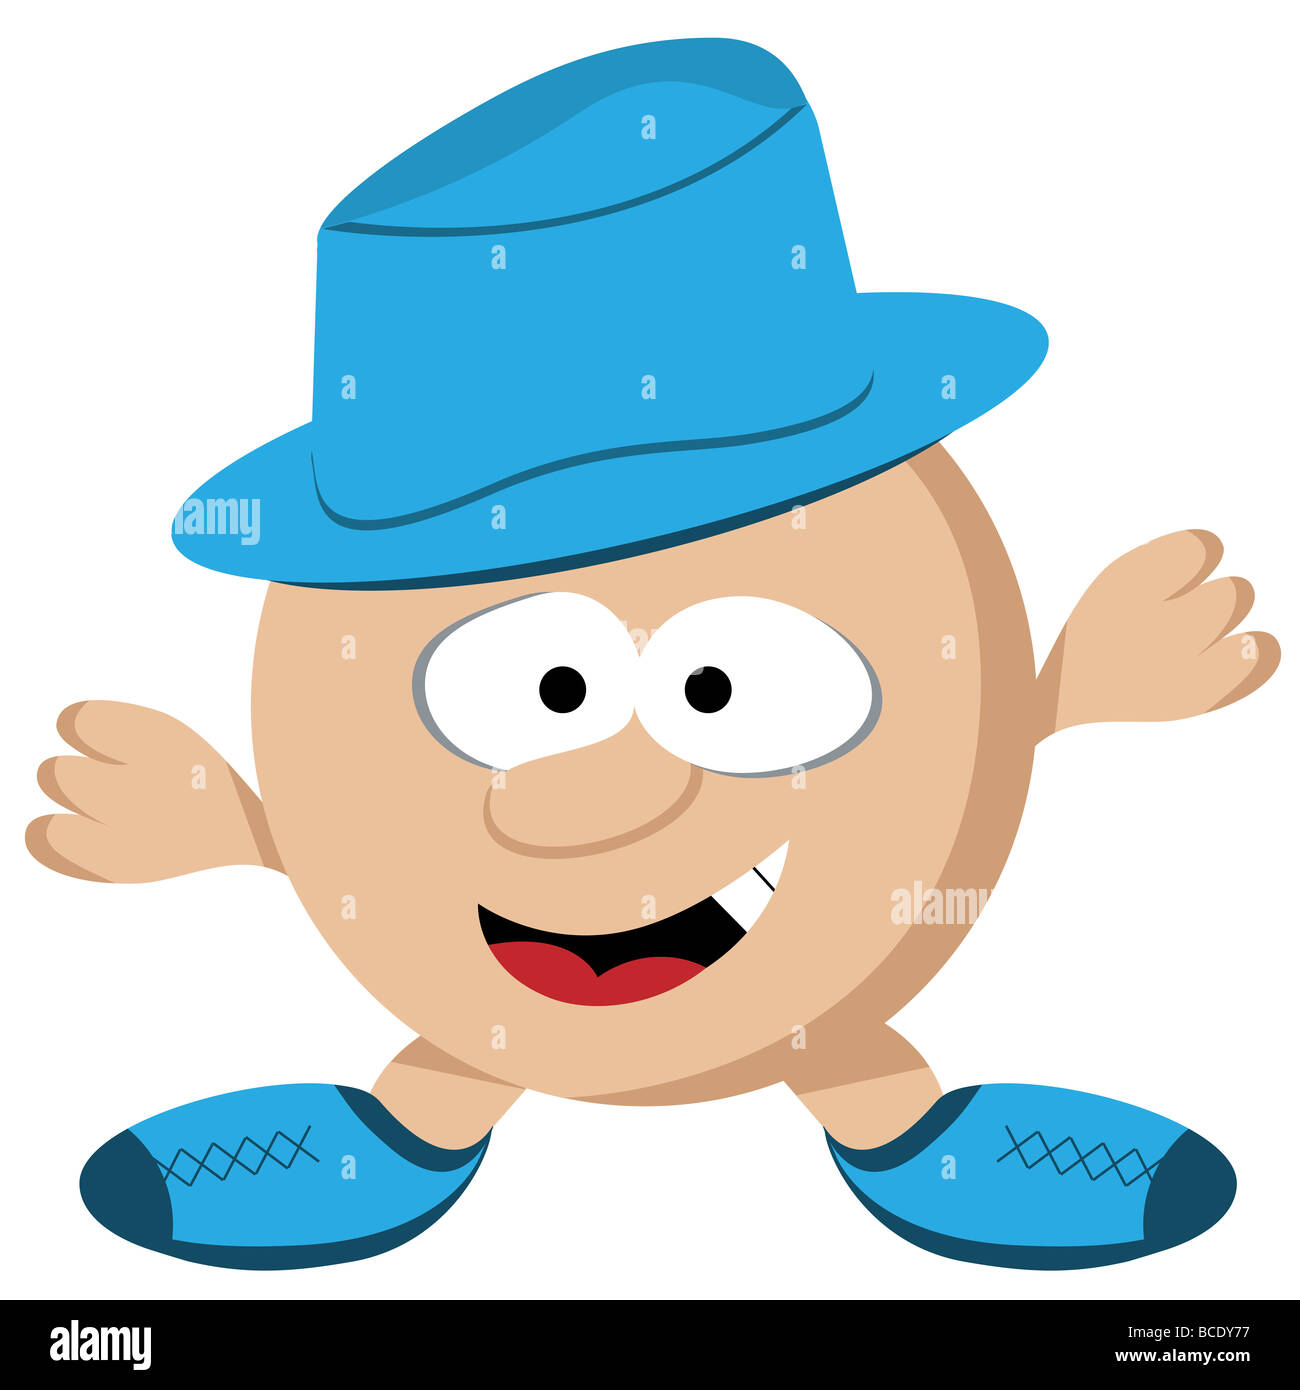 Cartoon character round guy with short legs and arms wearing a blue hat. Comical face Stock Photo